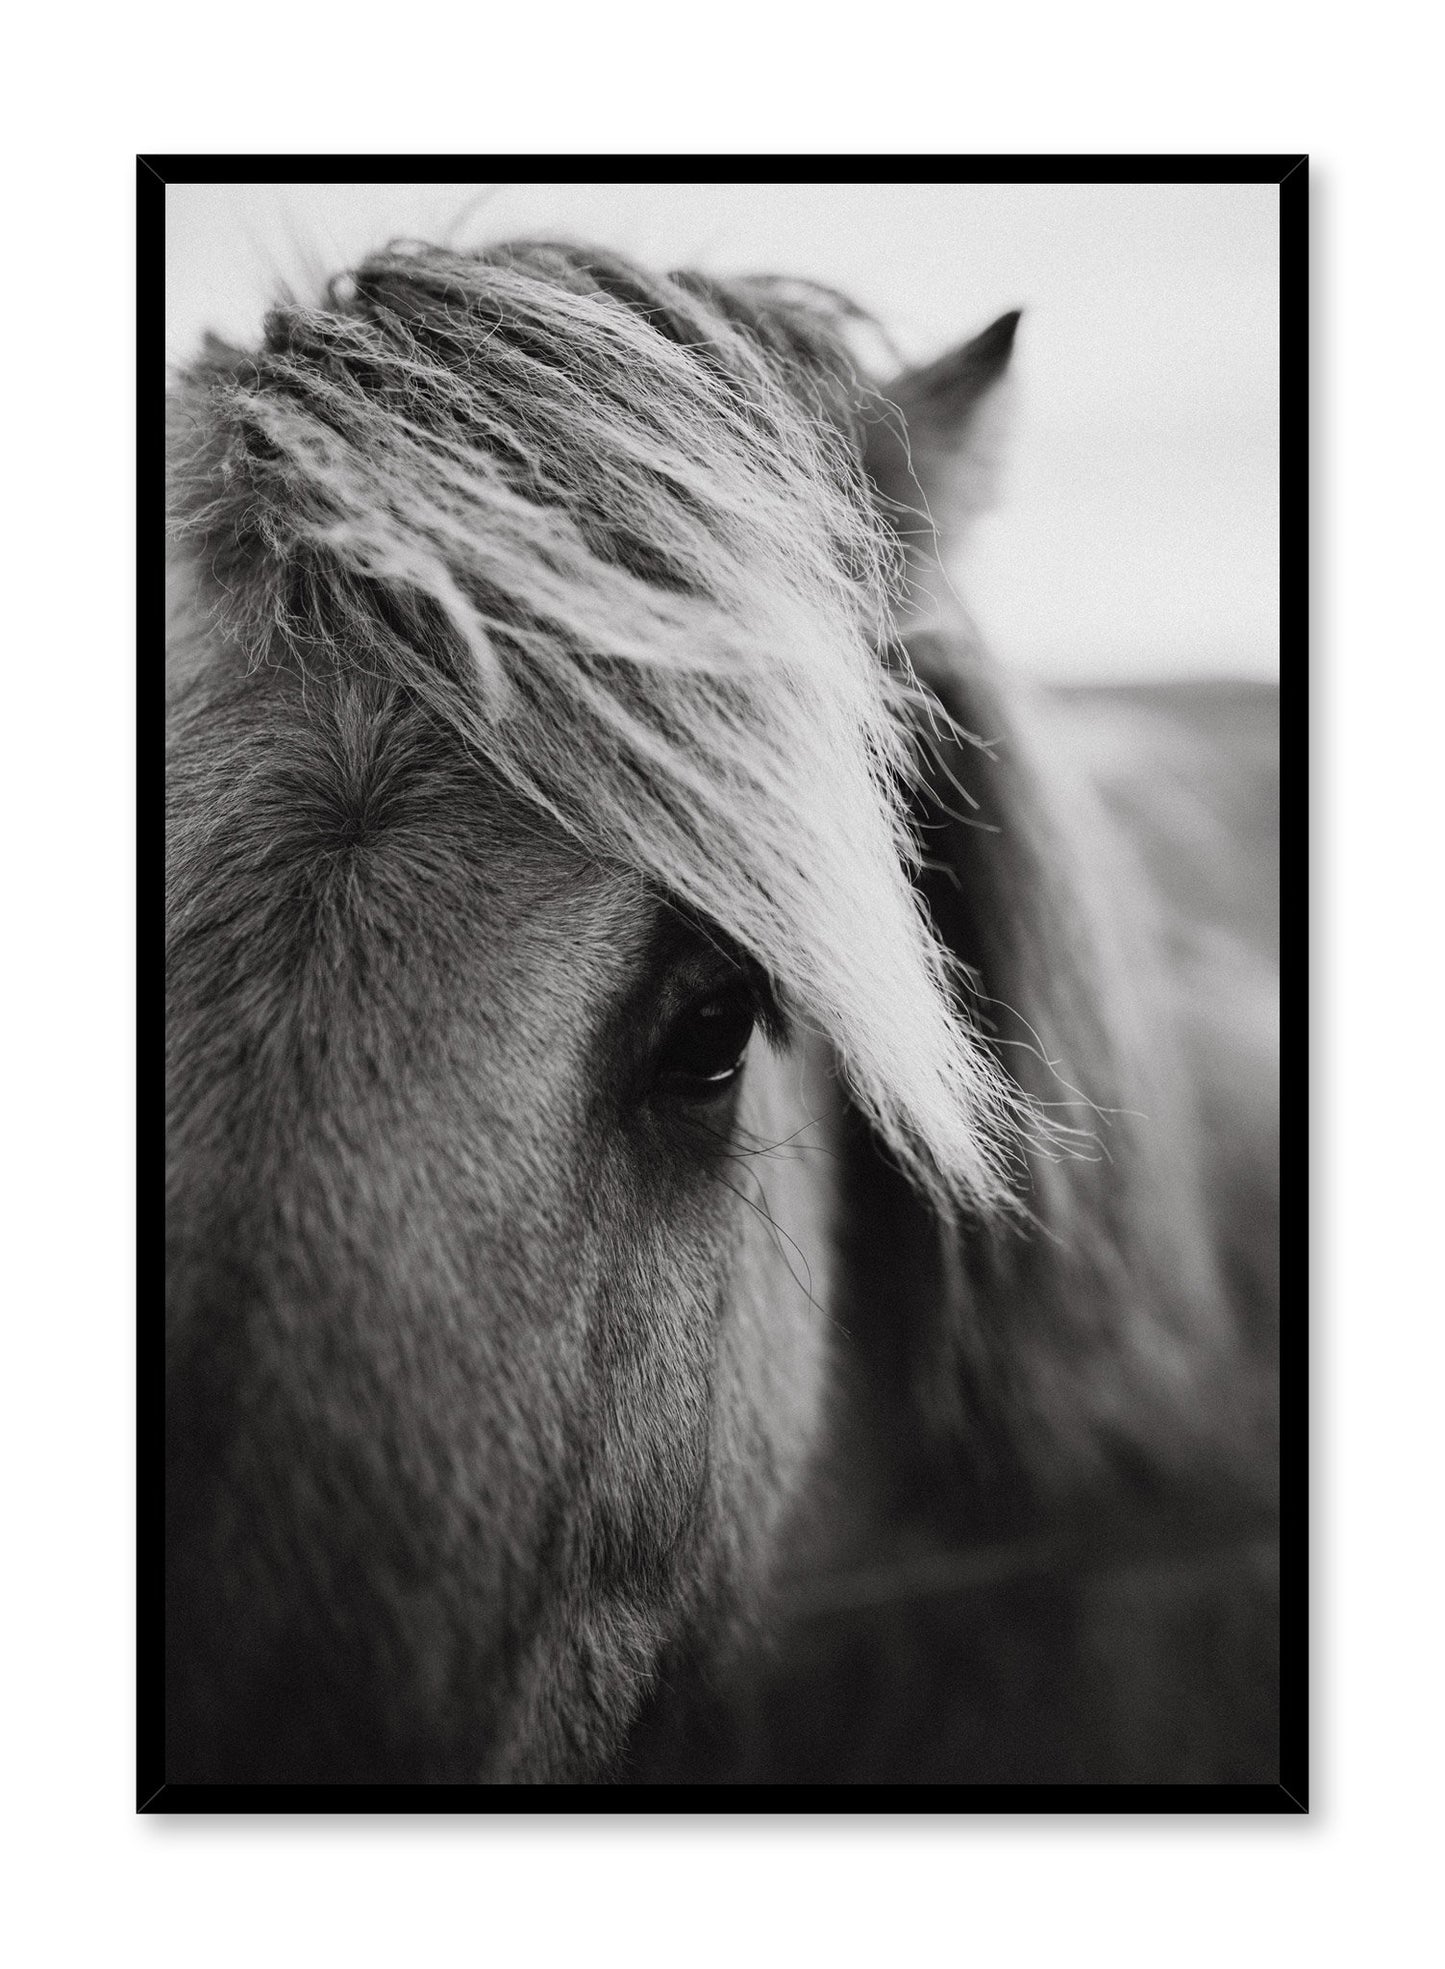 Modern minimalist poster by Opposite Wall with black and white photography of horse